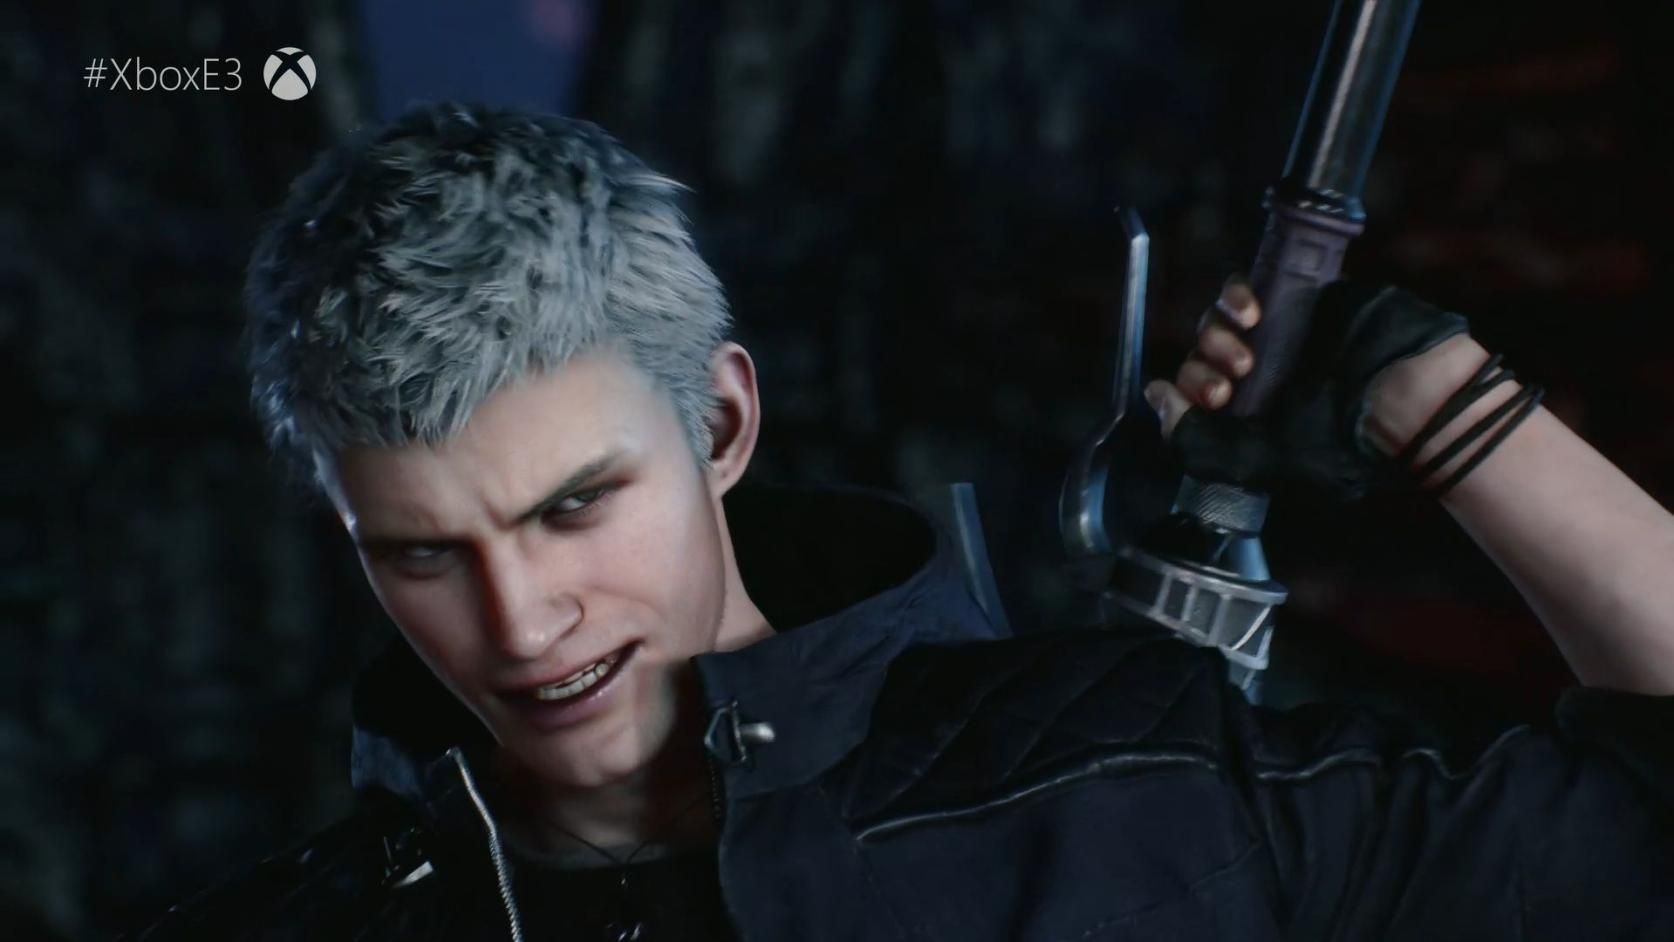 BURY THE LIGHT DEEP WITHIN on Twitter TheDemonRamen DMC5 gave us  more space for Neros mom features The upper part of Neros face is very  Vergil His eyes eyebrow arch amp nose